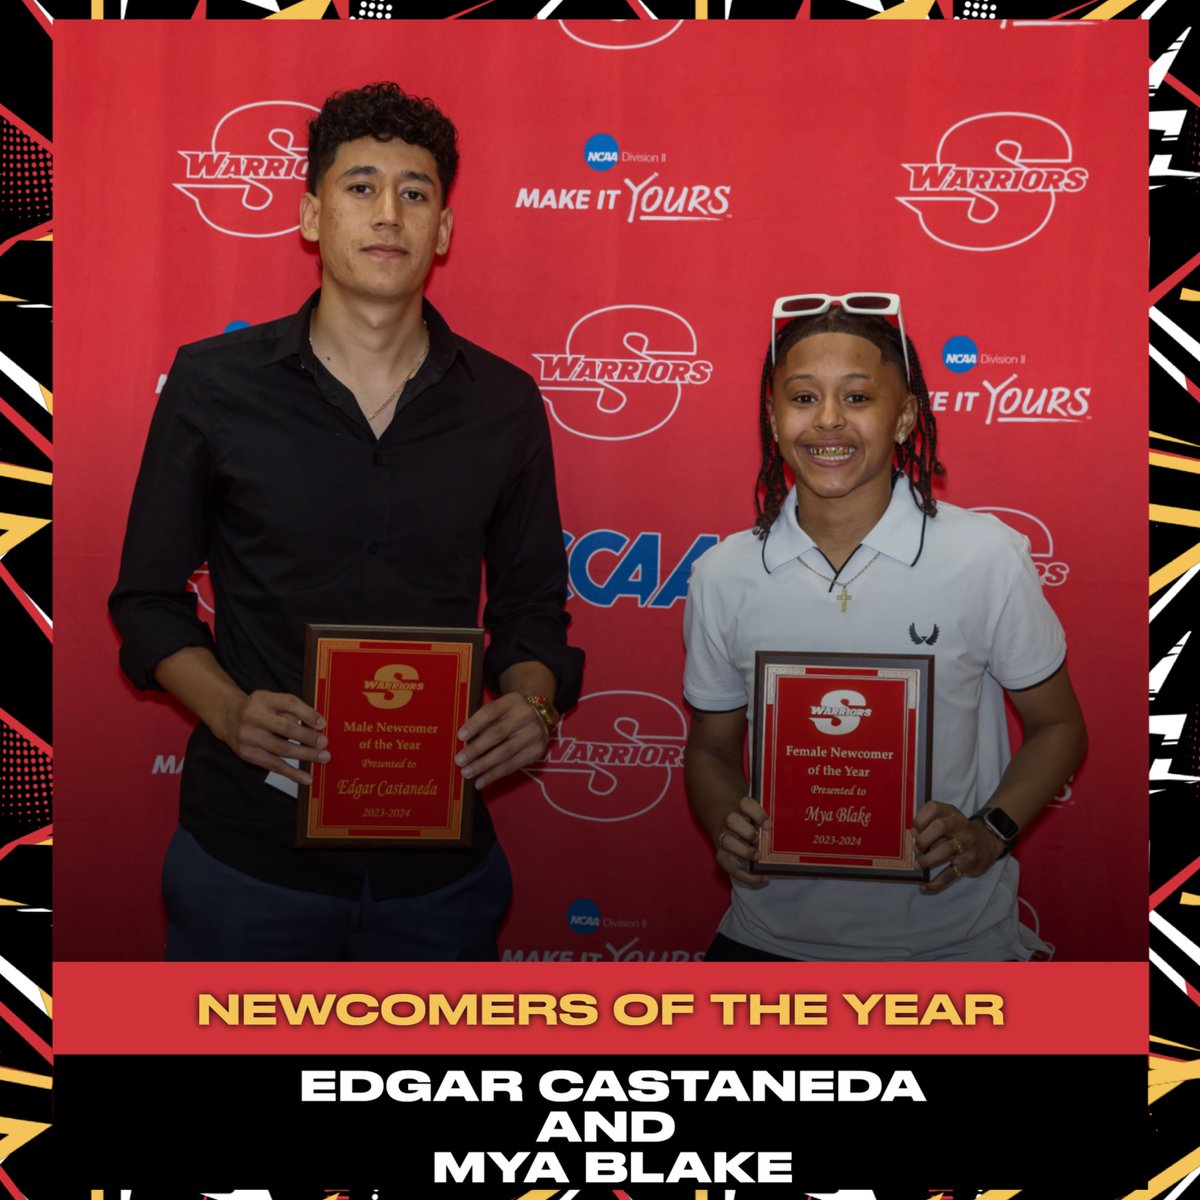 Our next series of Award winners from The STANYS that was held on May 17, starts with our Newcomers of the Year in Edgar Castaneda and Mya Blake. #ValleyTough